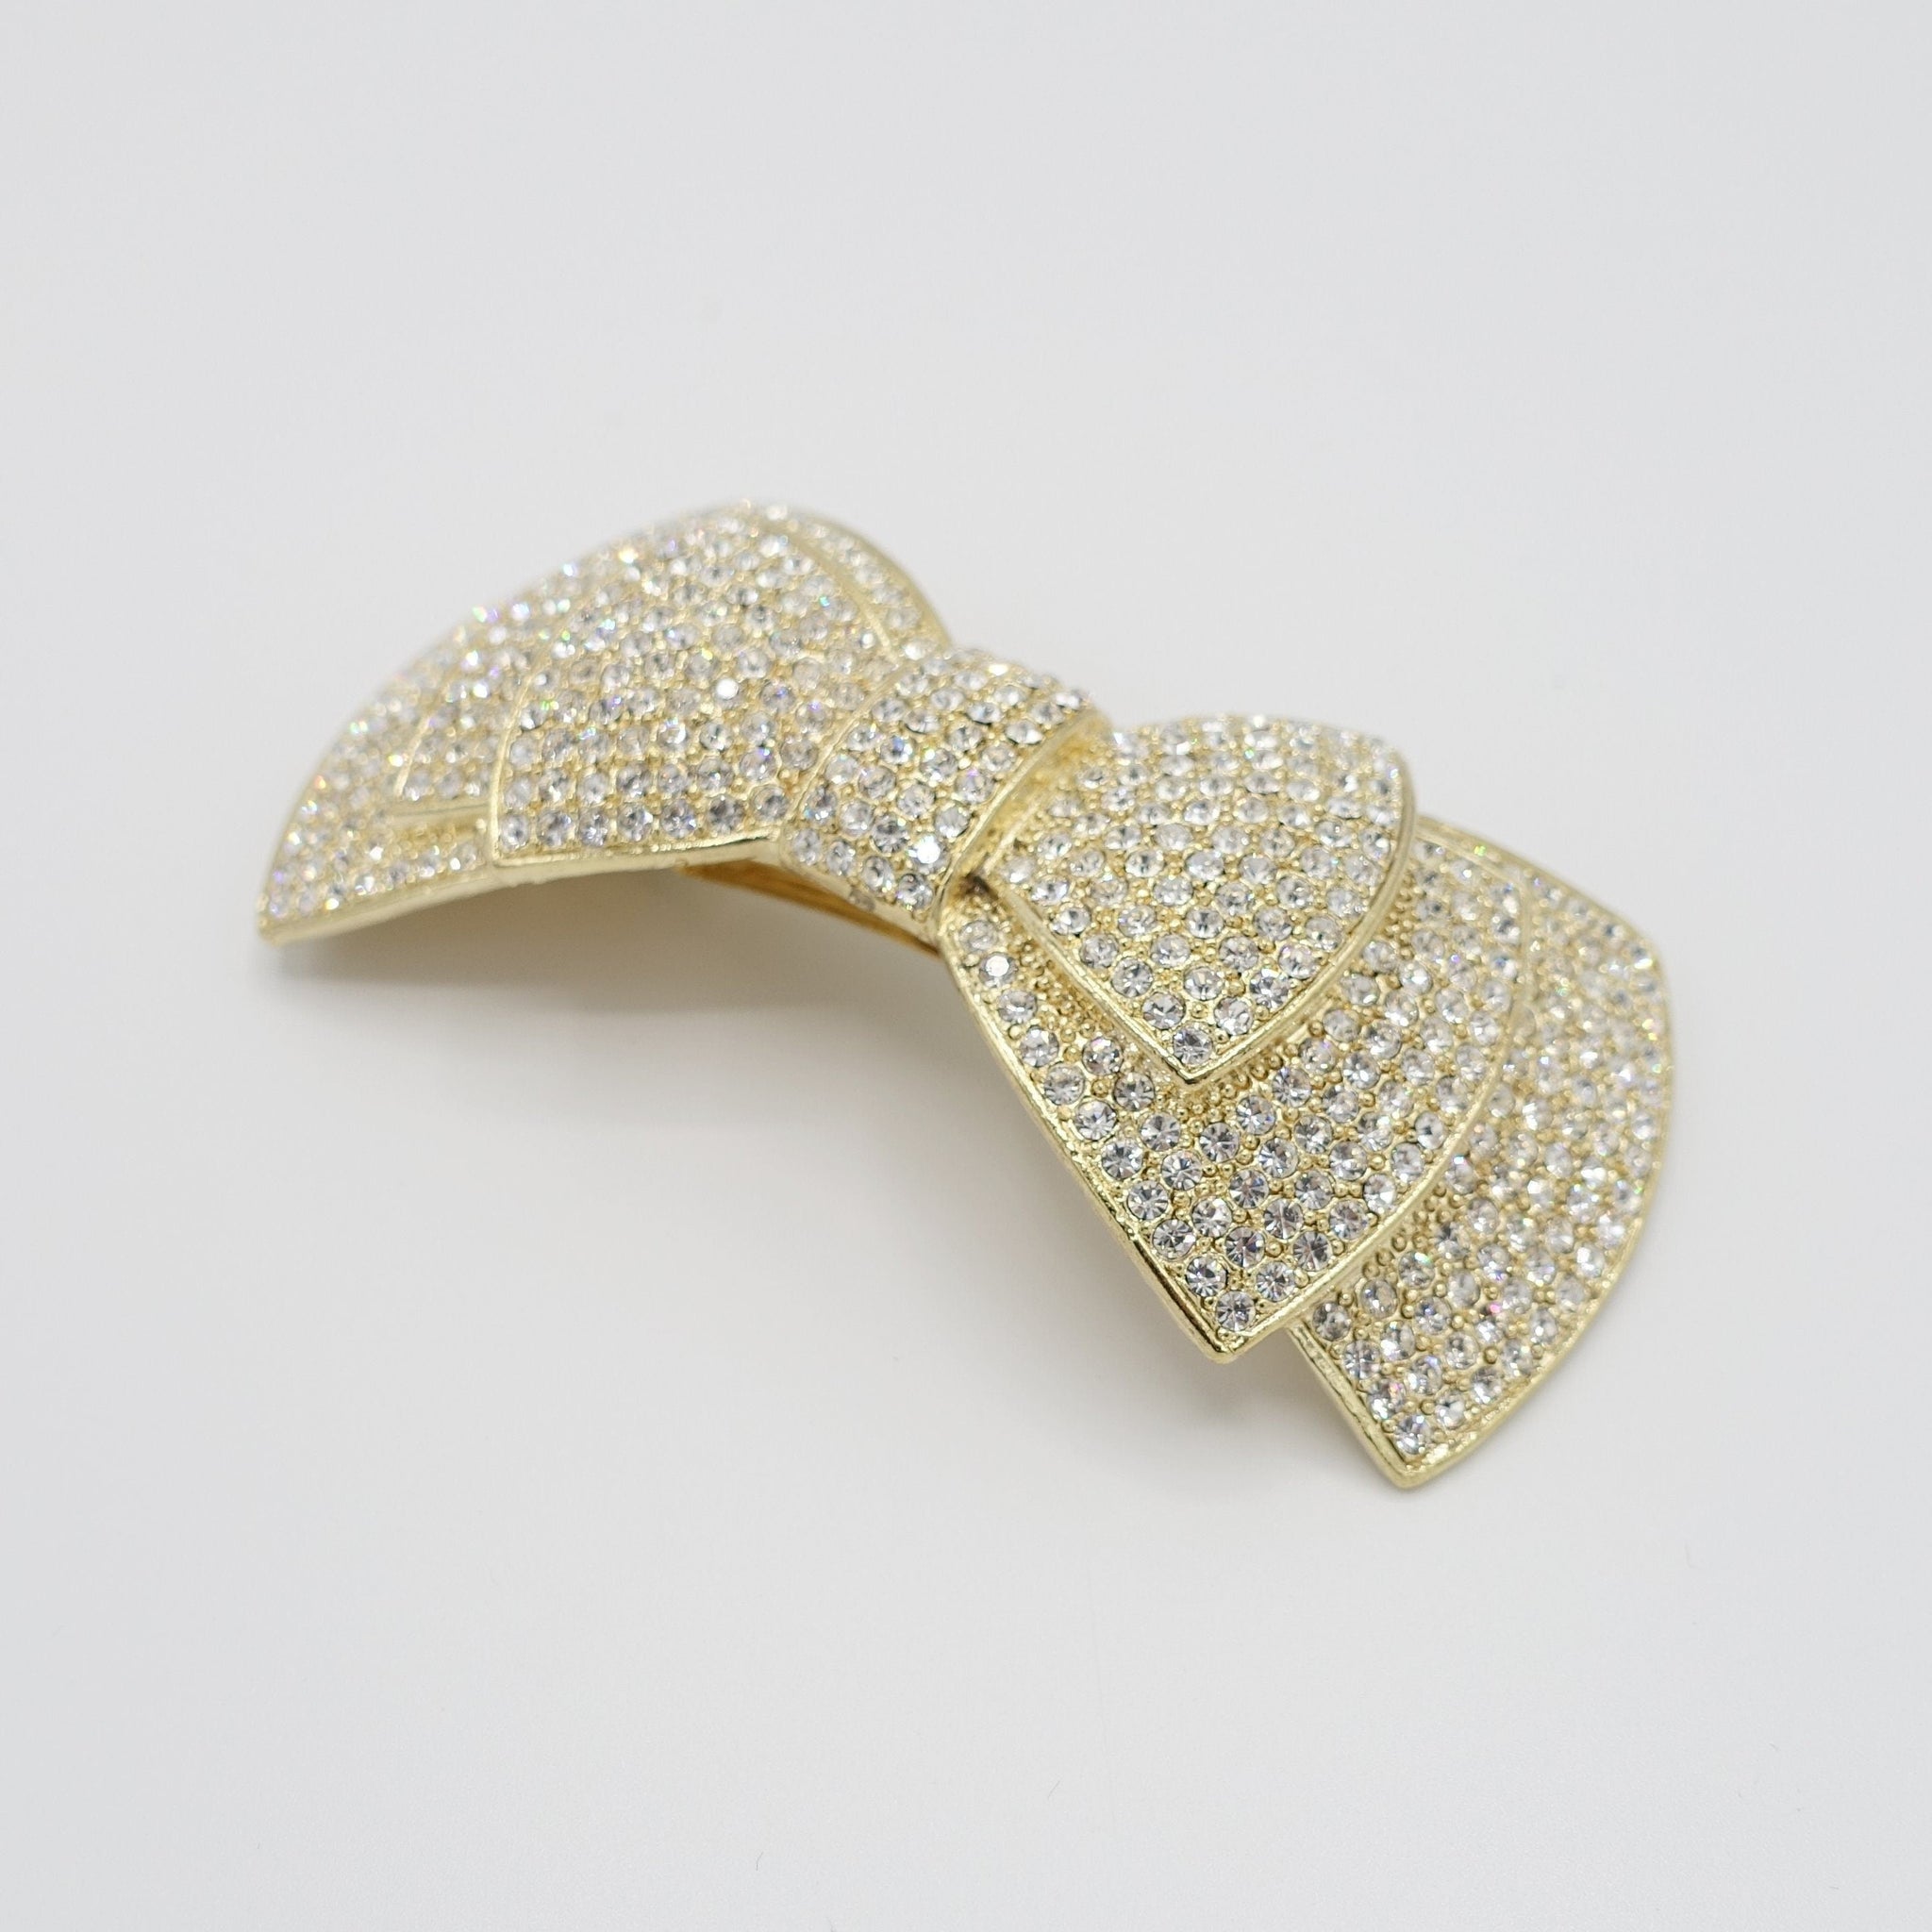 veryshine.com Barrette (Bow) Gold Crystal layered hair bow rhinestone decorated french hair barrette crystal jewel decorated women hair accessory